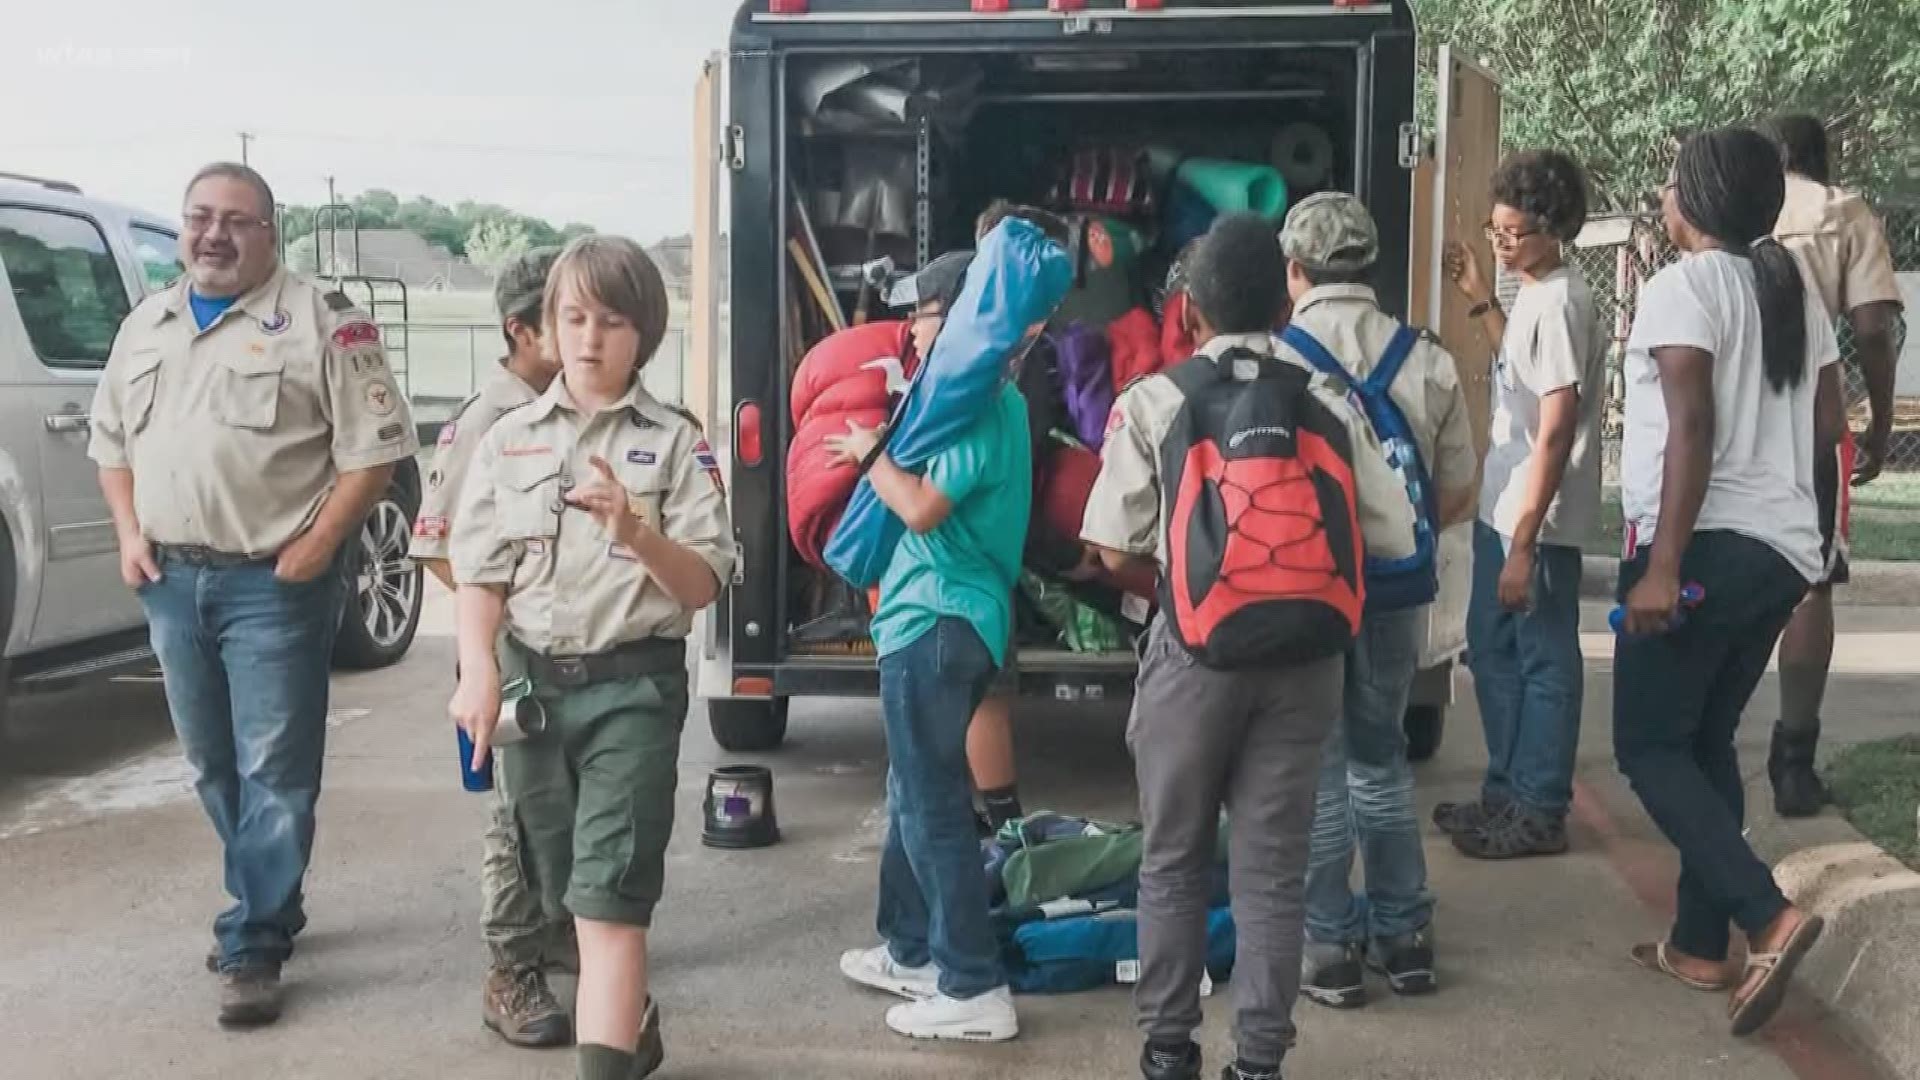 Duncanville Boy Scout Troop 129 is trying to figure out how to move forward after someone stole a trailer containing all their camping equipment.

“They feel like they were targeted for no reason,” troop committee chair Bettie George said. “We teach them to be trustworthy and loyal and be good citizens and respectful to each other and to have somebody be this disrespectful to them is kind of disheartening to them.”